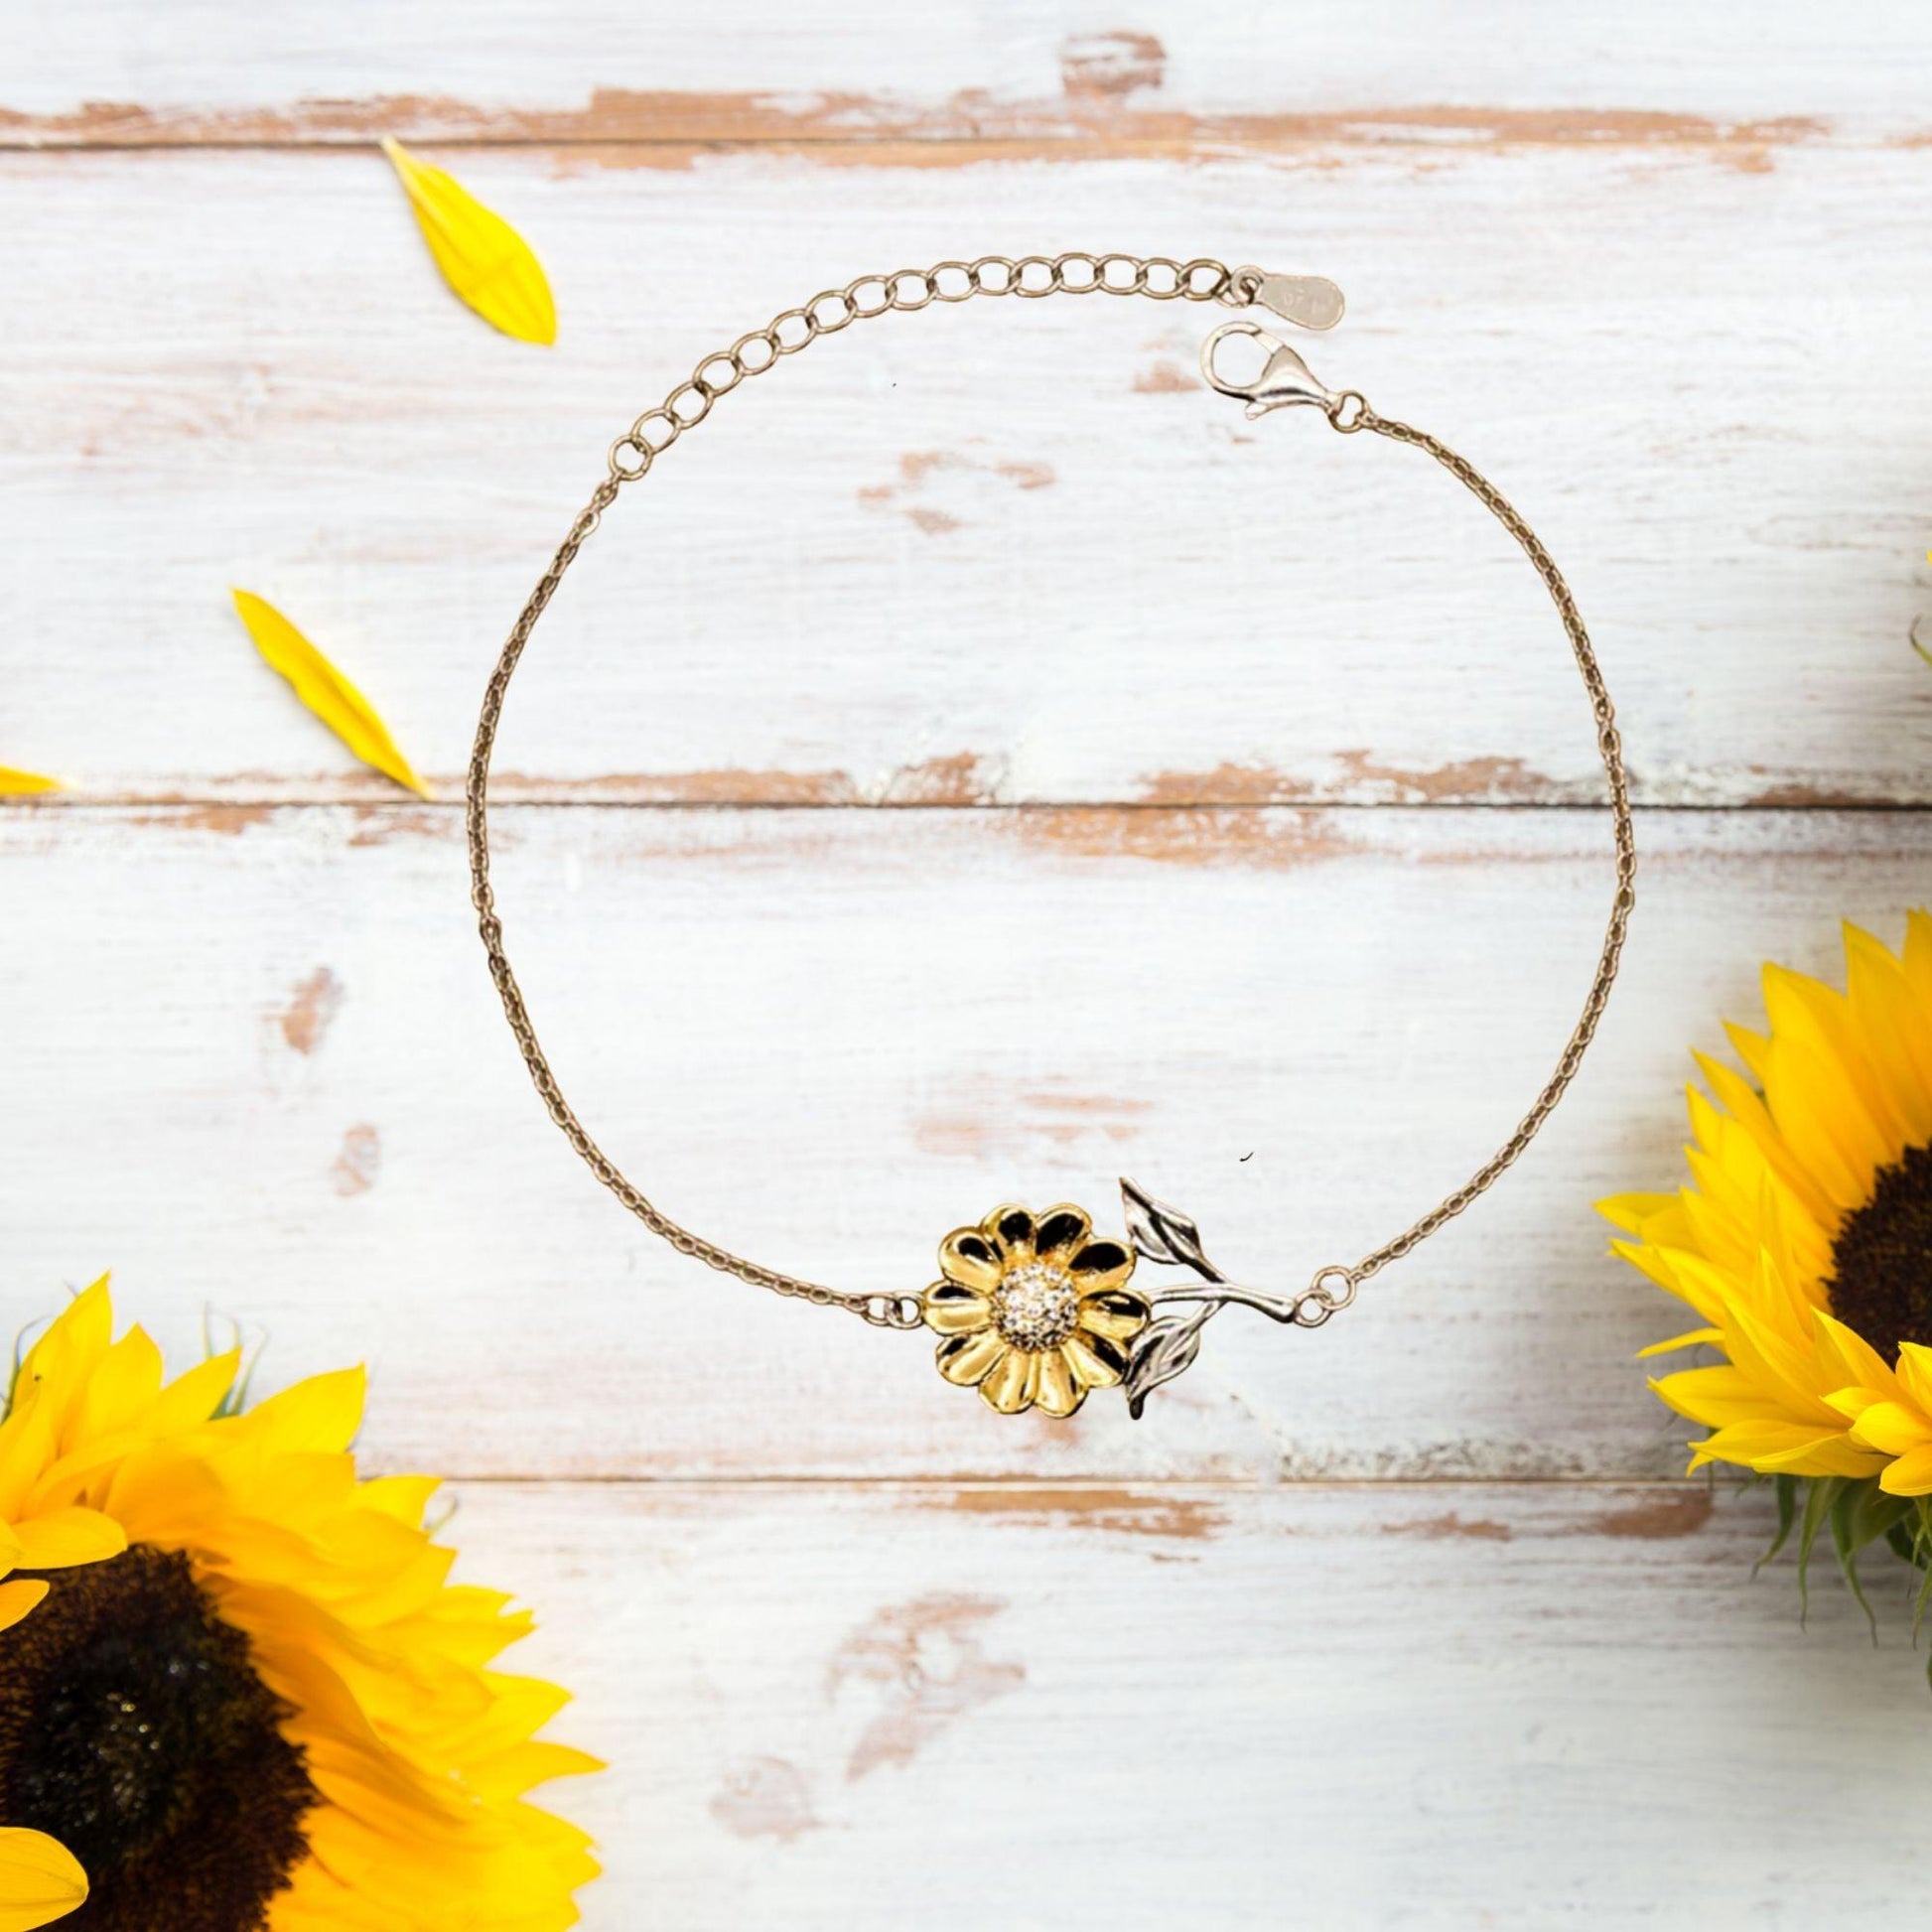 Remarkable Database Administrator Gifts, Your dedication and hard work, Inspirational Birthday Christmas Unique Sunflower Bracelet For Database Administrator, Coworkers, Men, Women, Friends - Mallard Moon Gift Shop